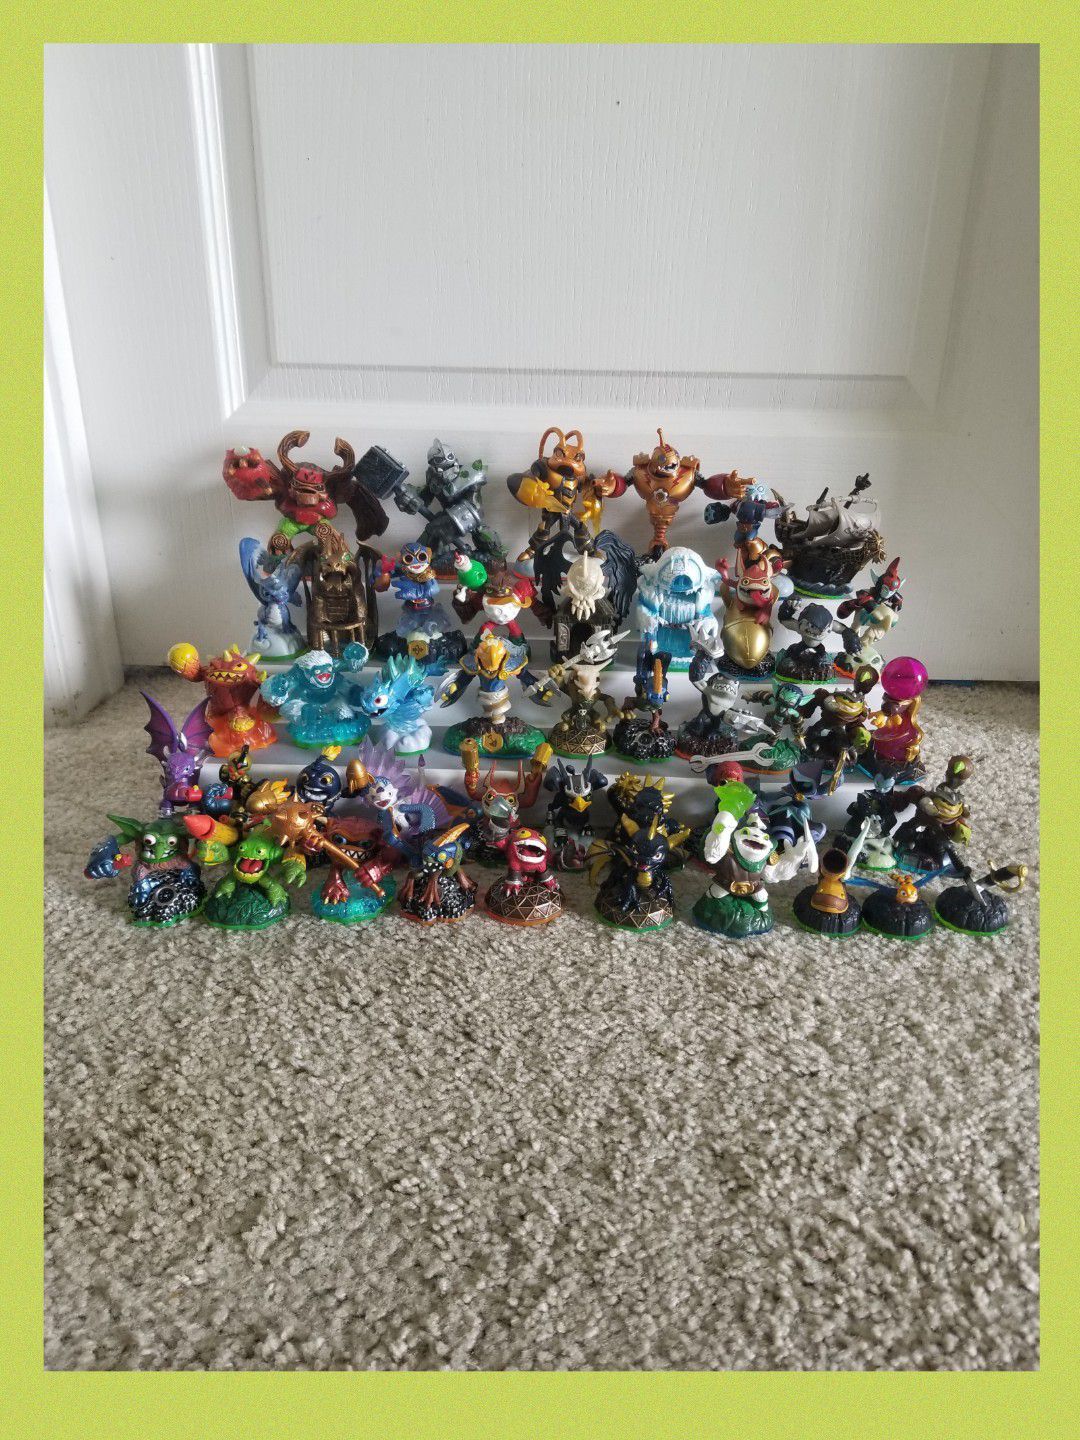 Lot of 49 Great Skylanders in Great - Excellent condition - like new.